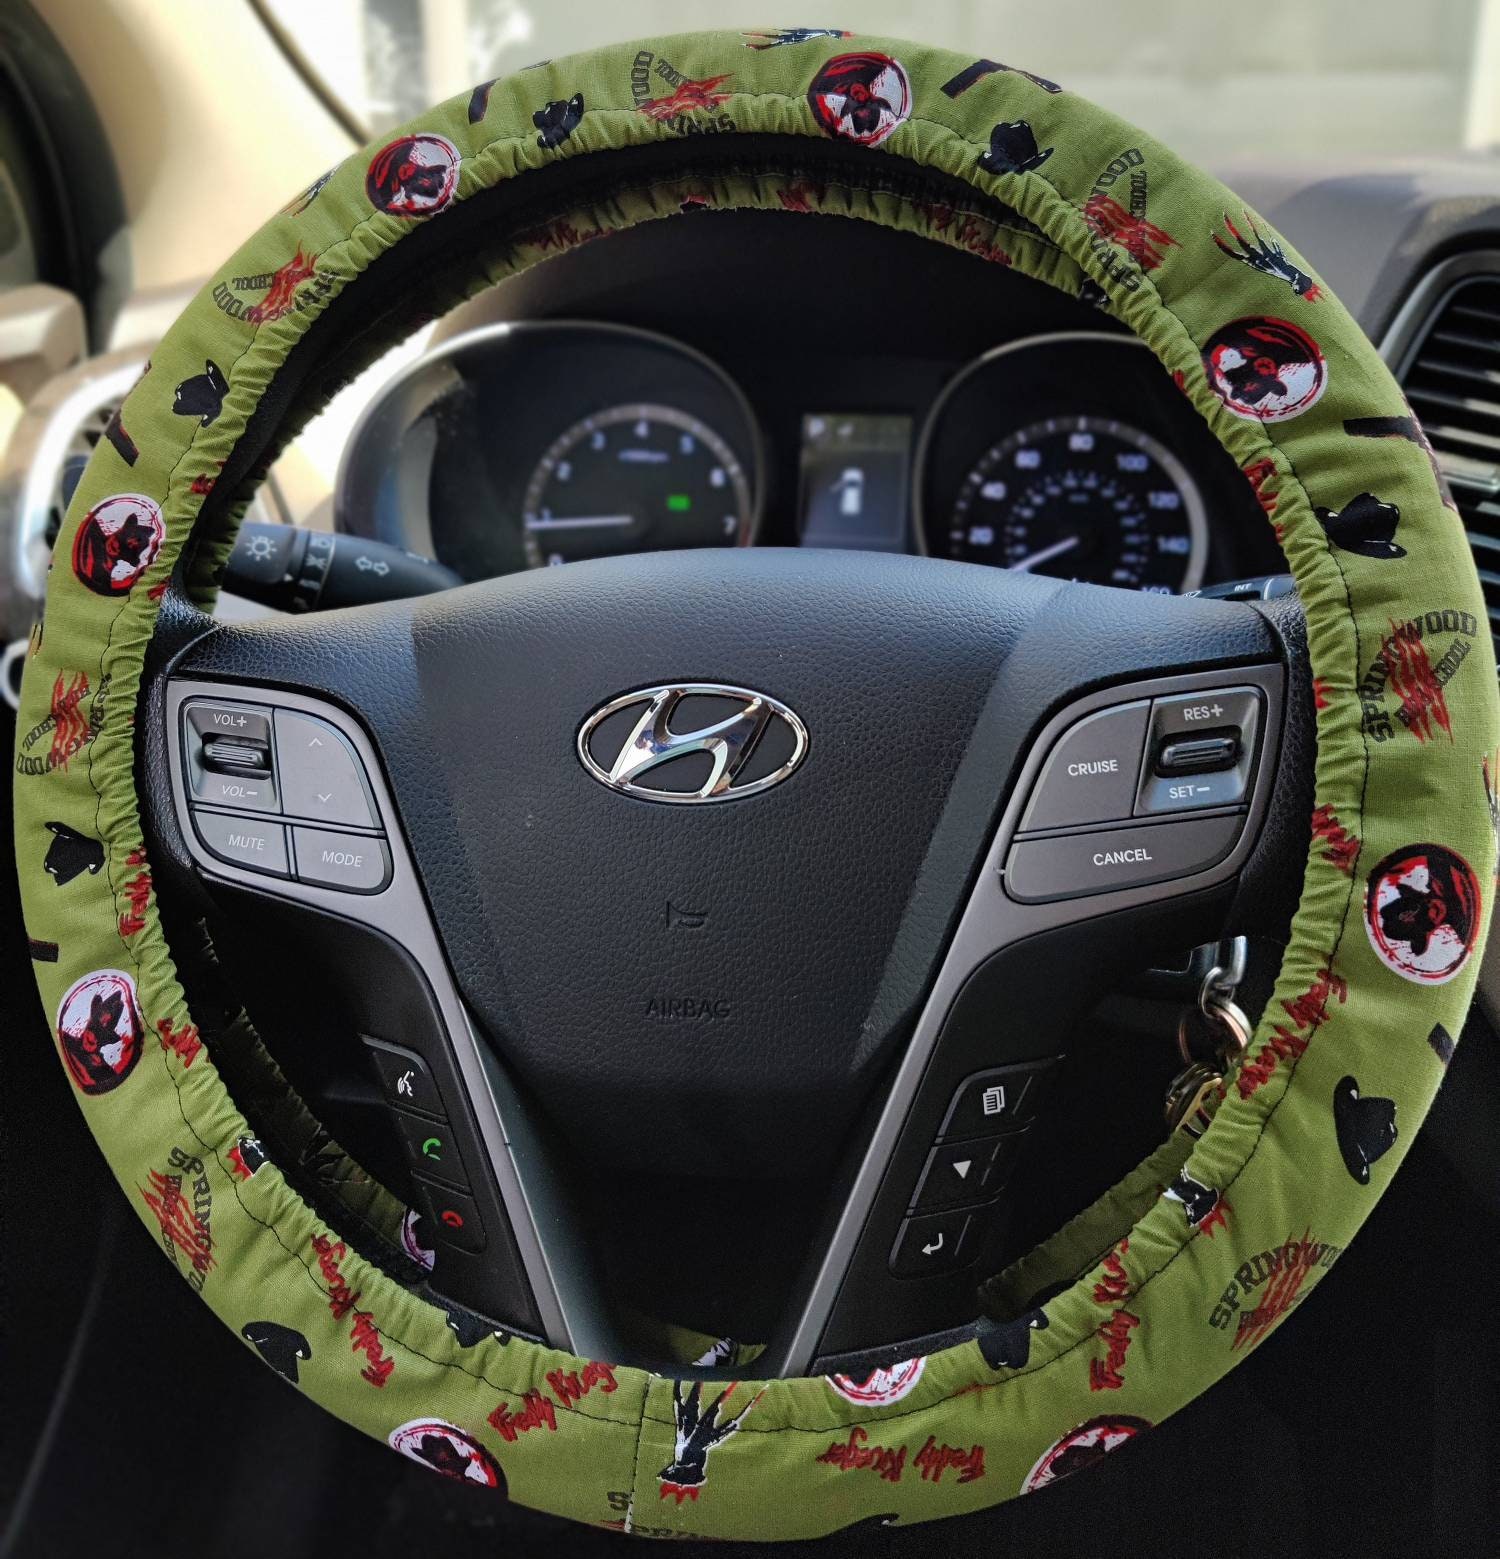 Harry Potter Deathly Hallows Steering Wheel Cover